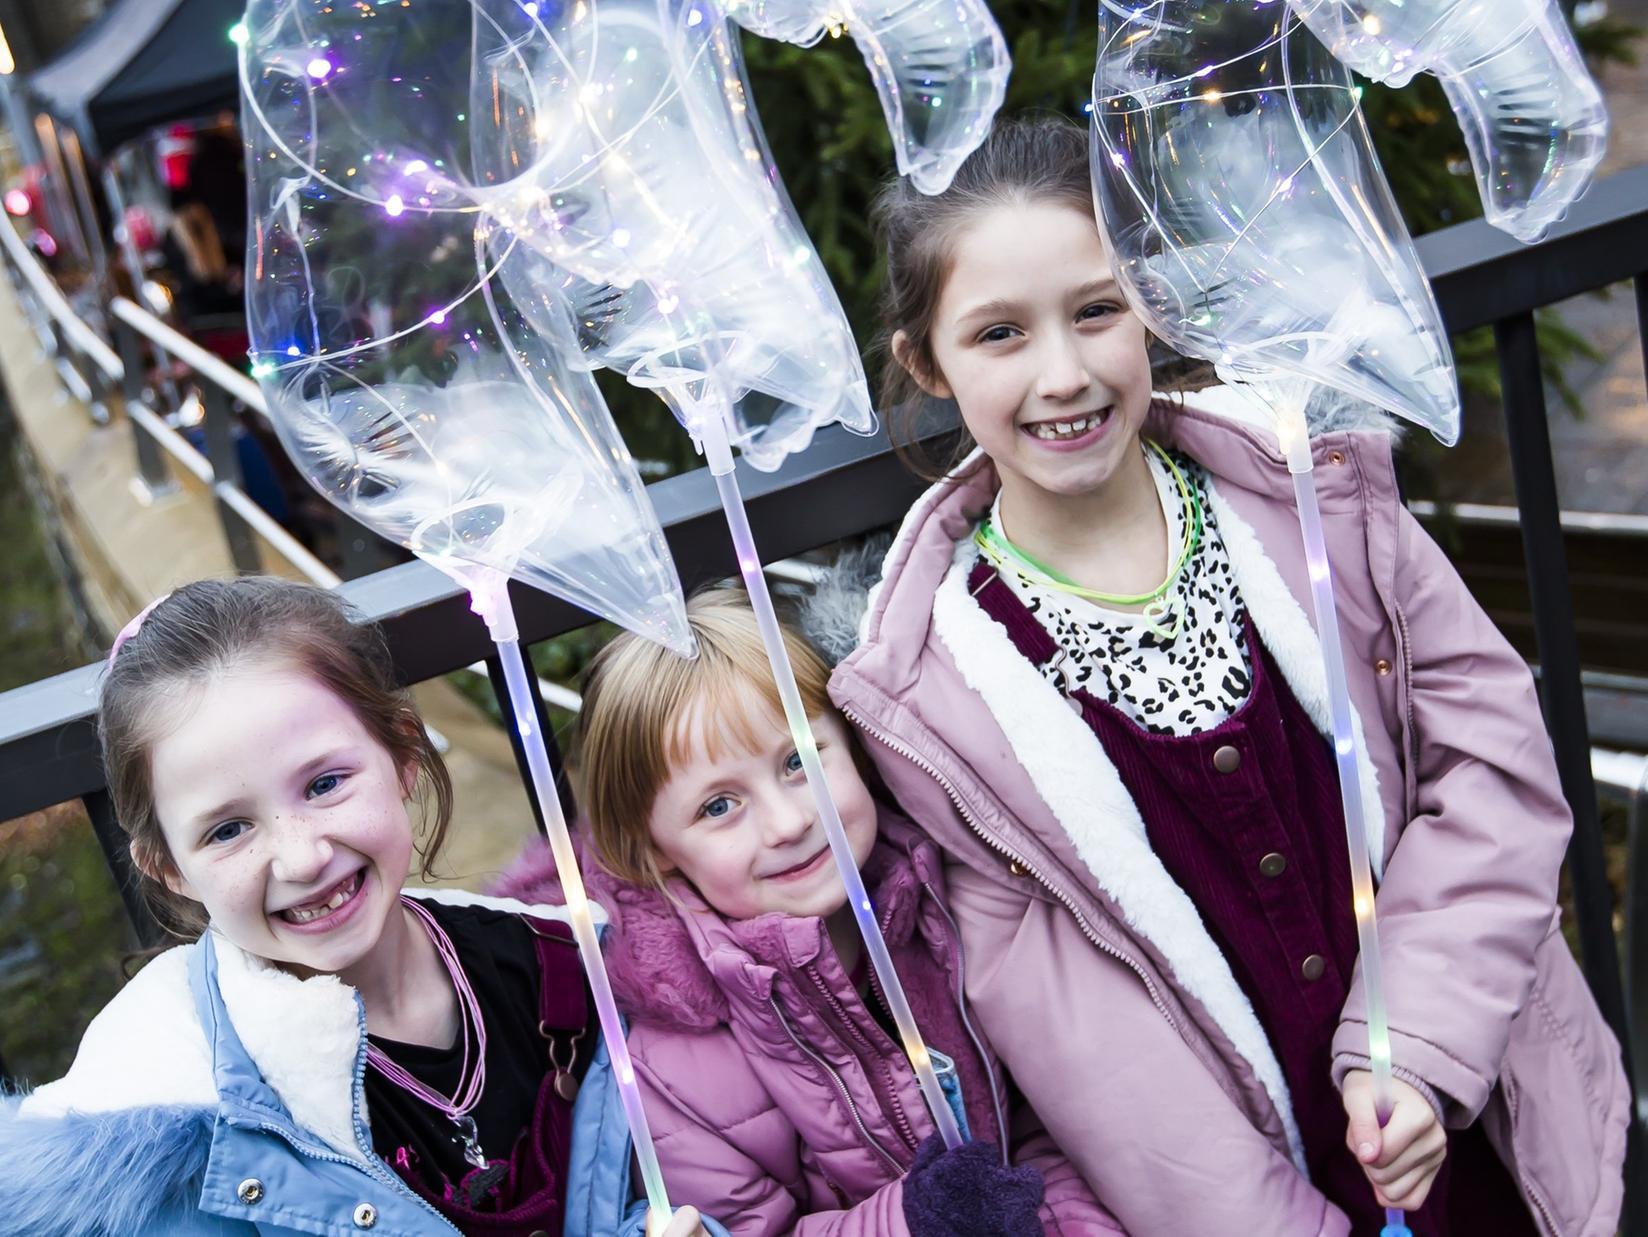 Isabelle Knight, seven, Phoebe Stafford, seven, and Olivia Knight, eight, having fun at the village event.